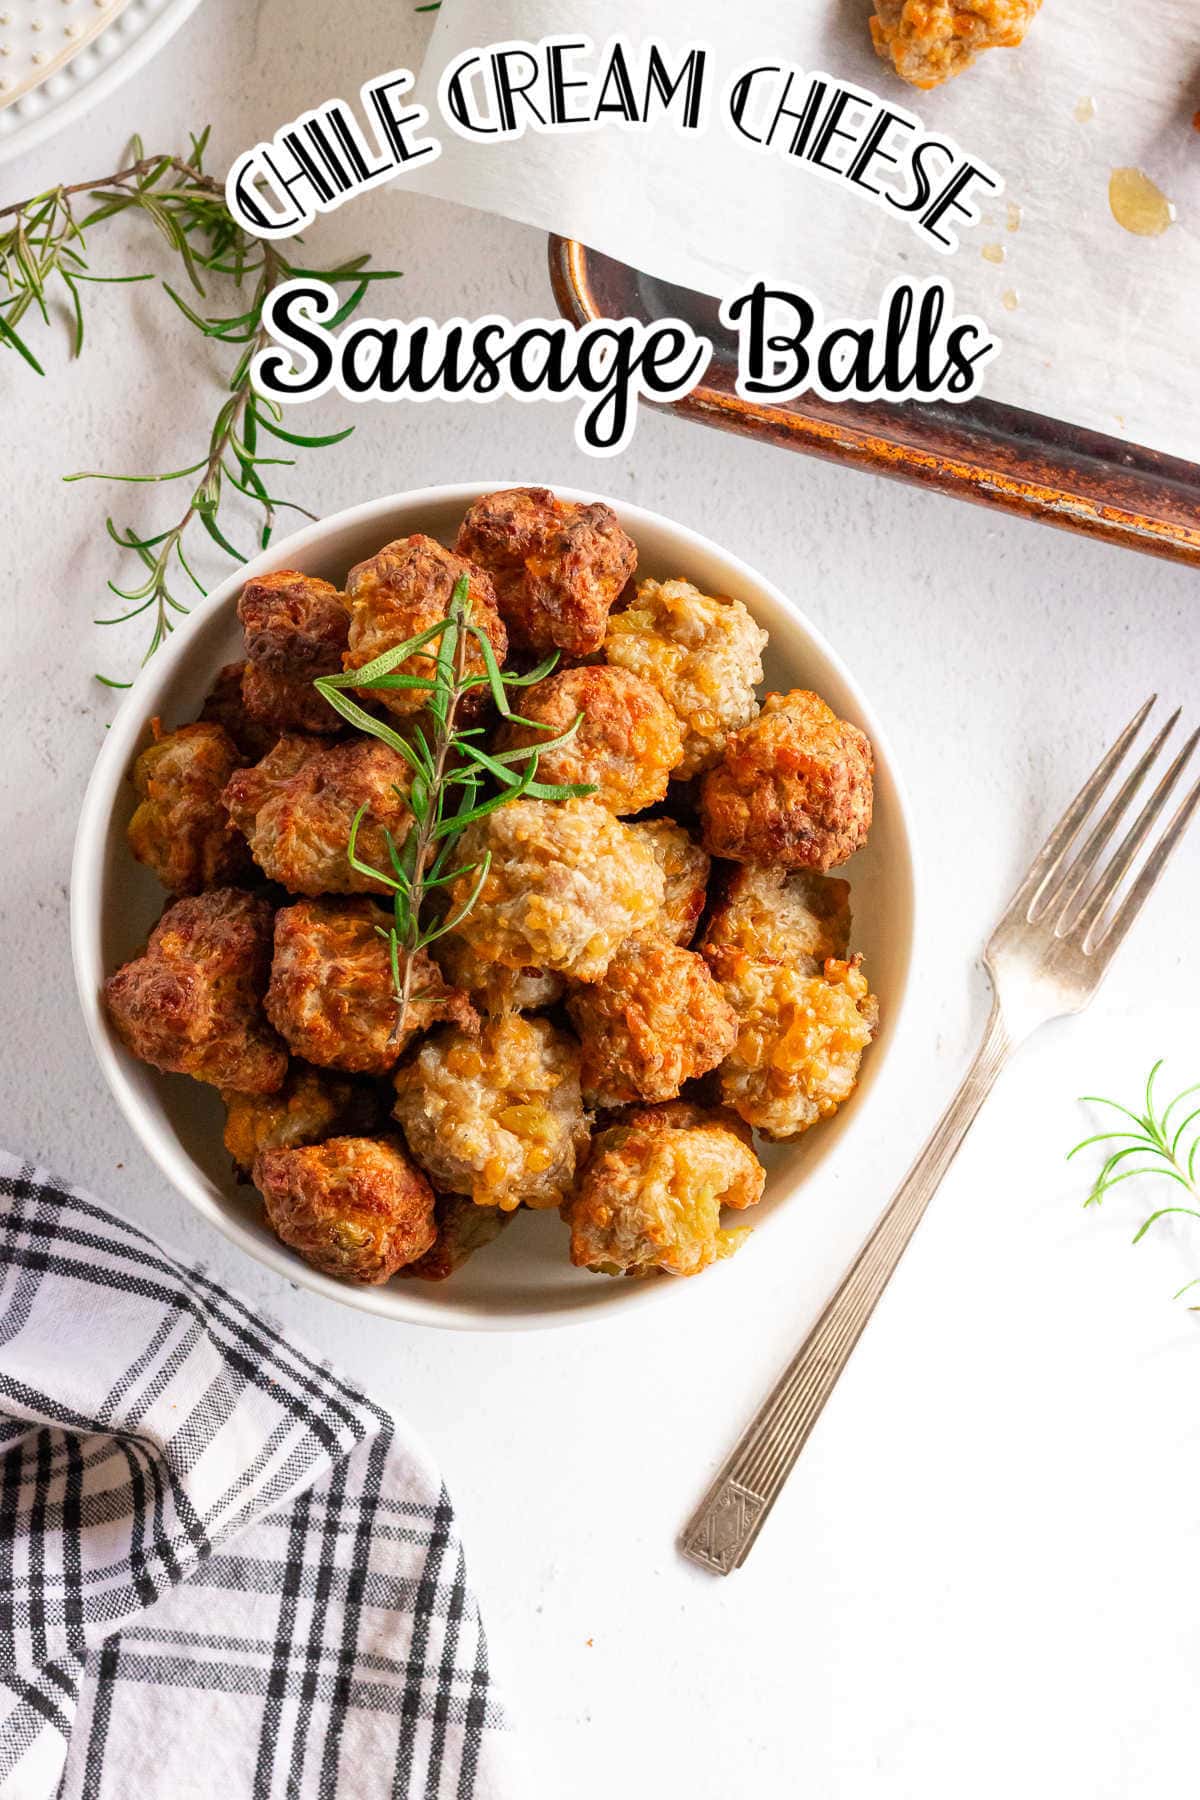 Overhead view of sausage balls with title text overlay.